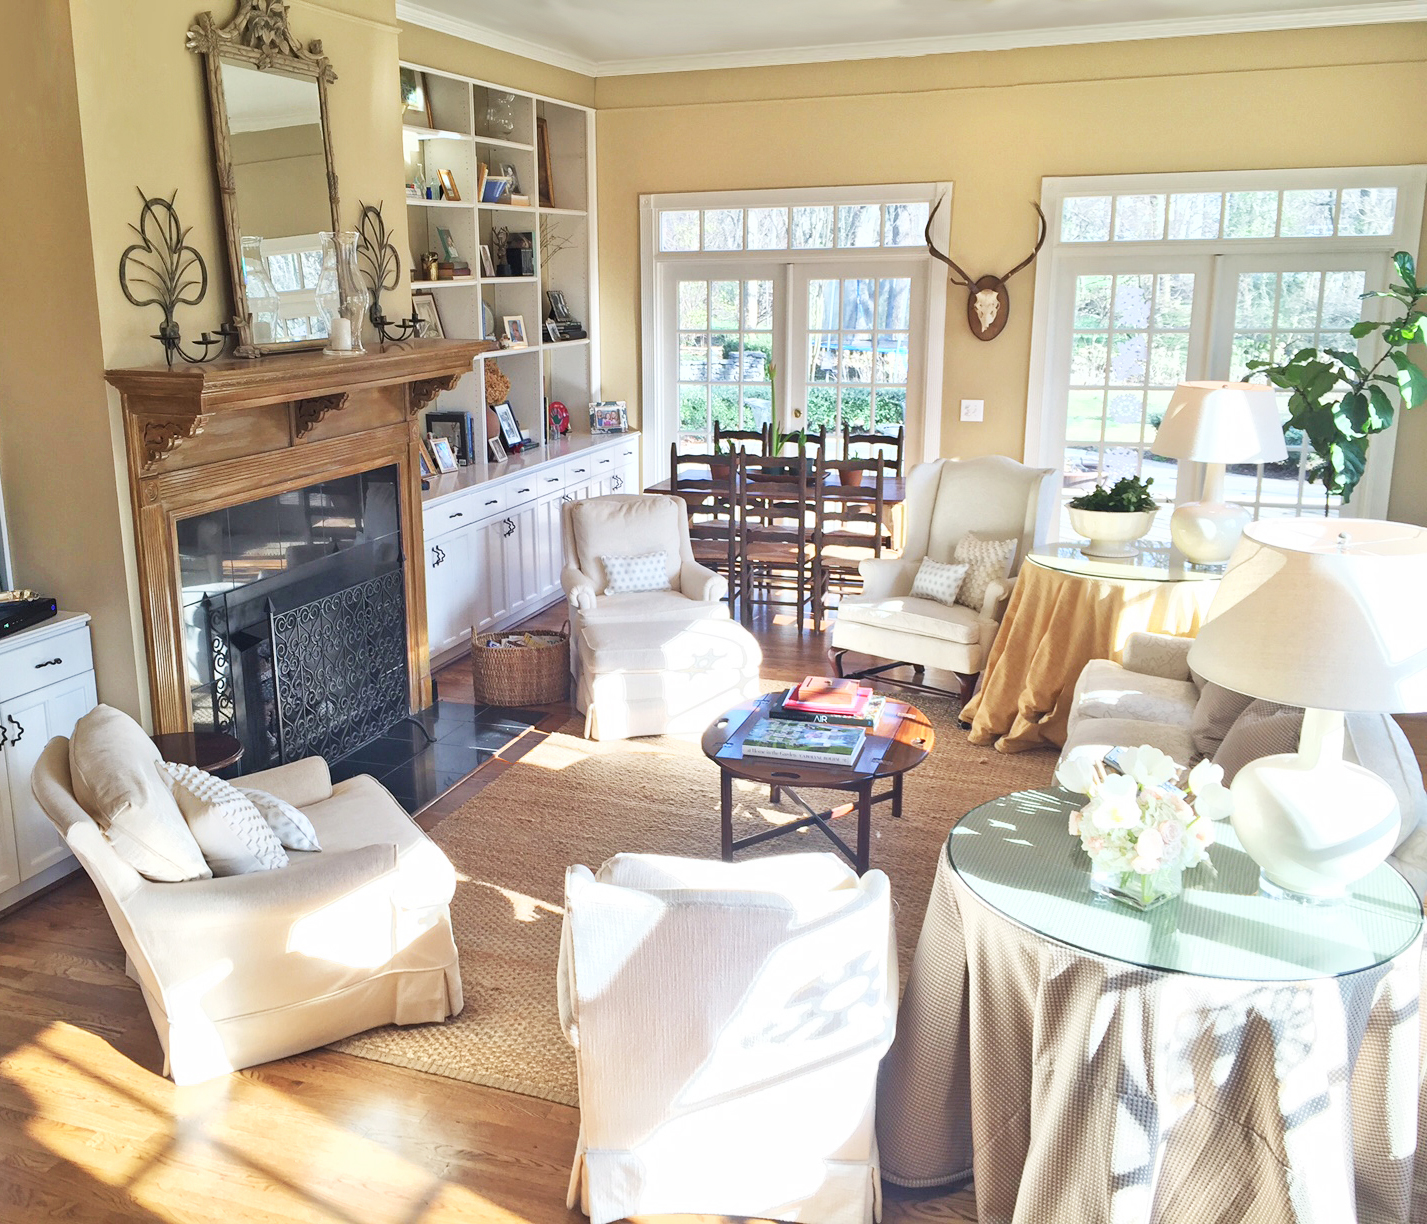 living room, anna, kristin, yarbrough, main, key, featured, images